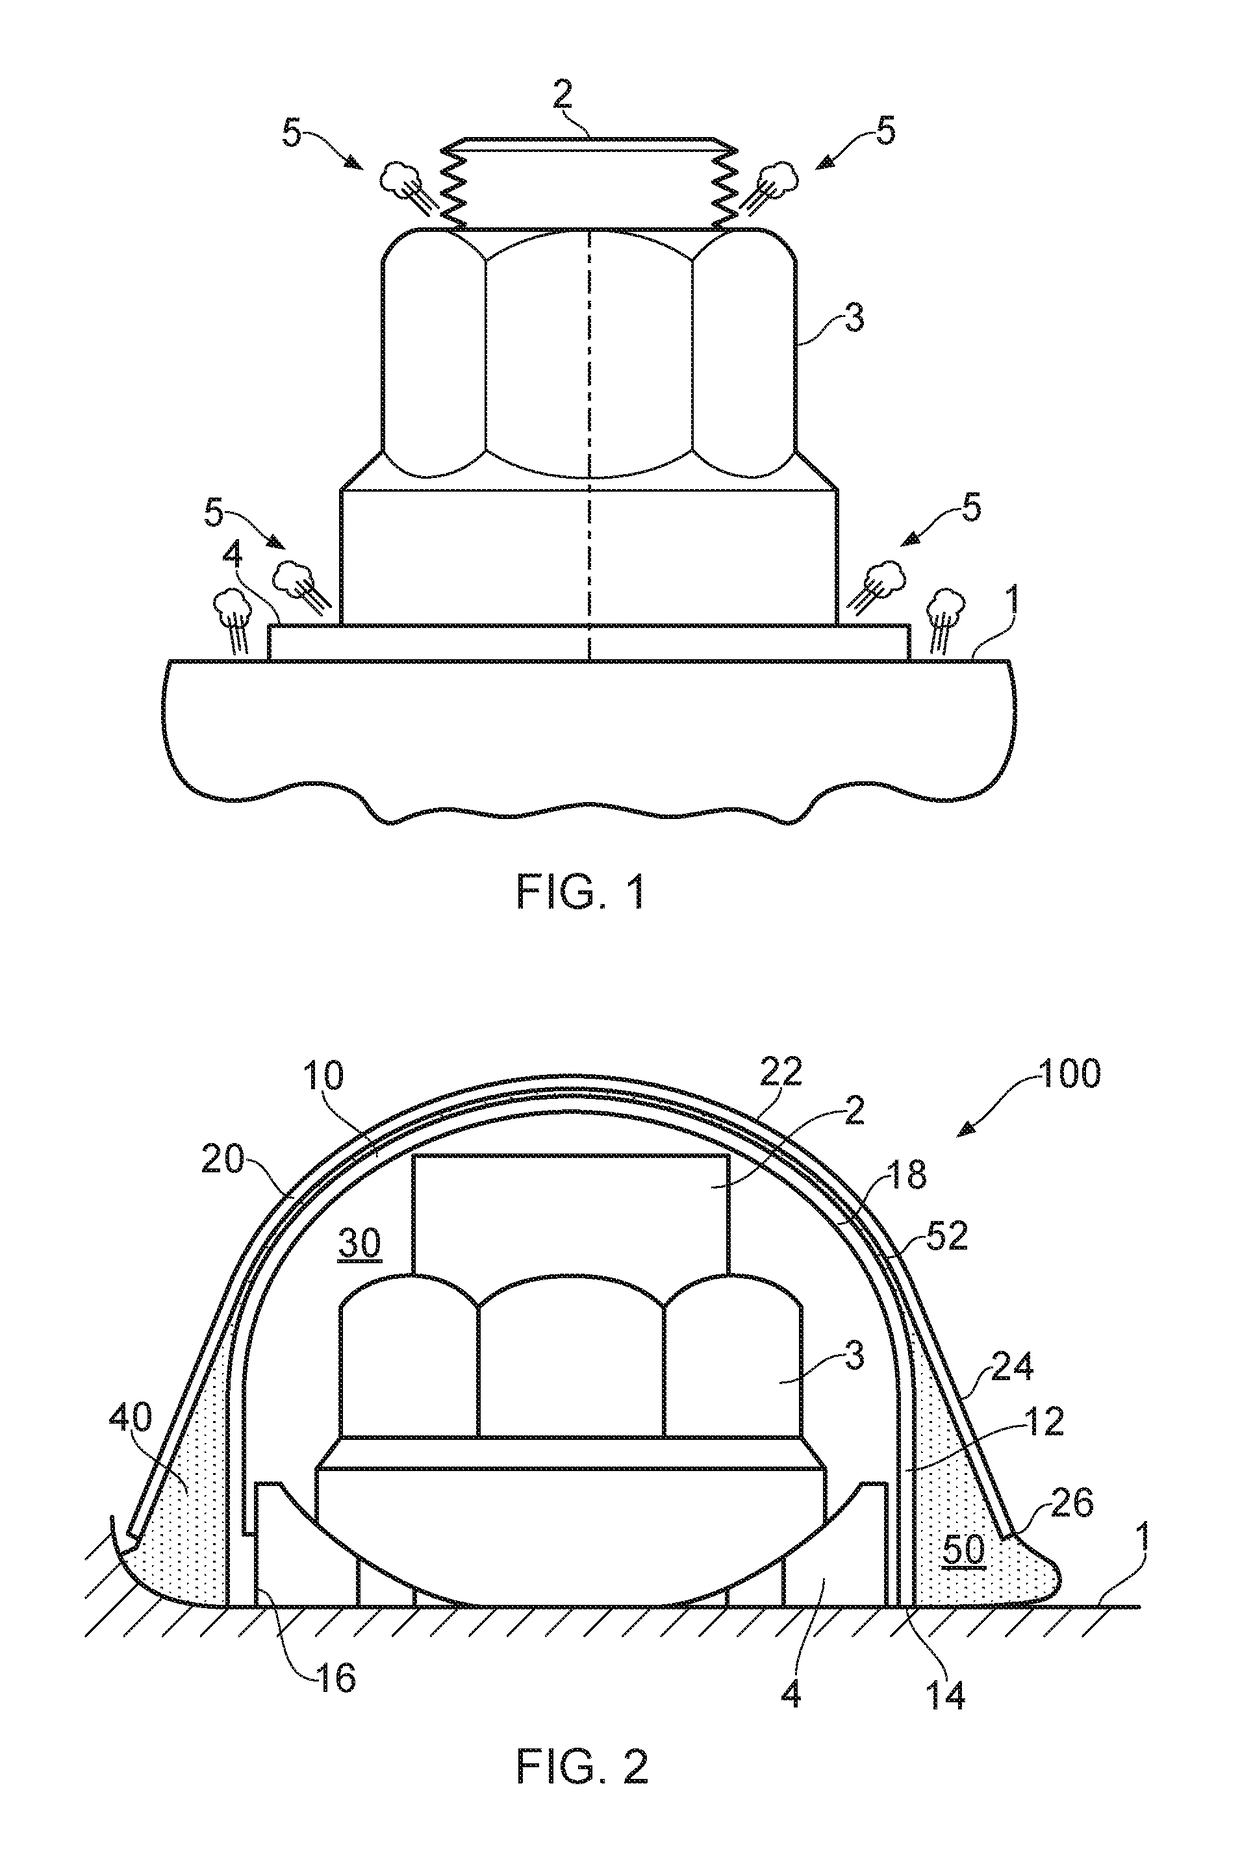 Method of installing a spark containment cap